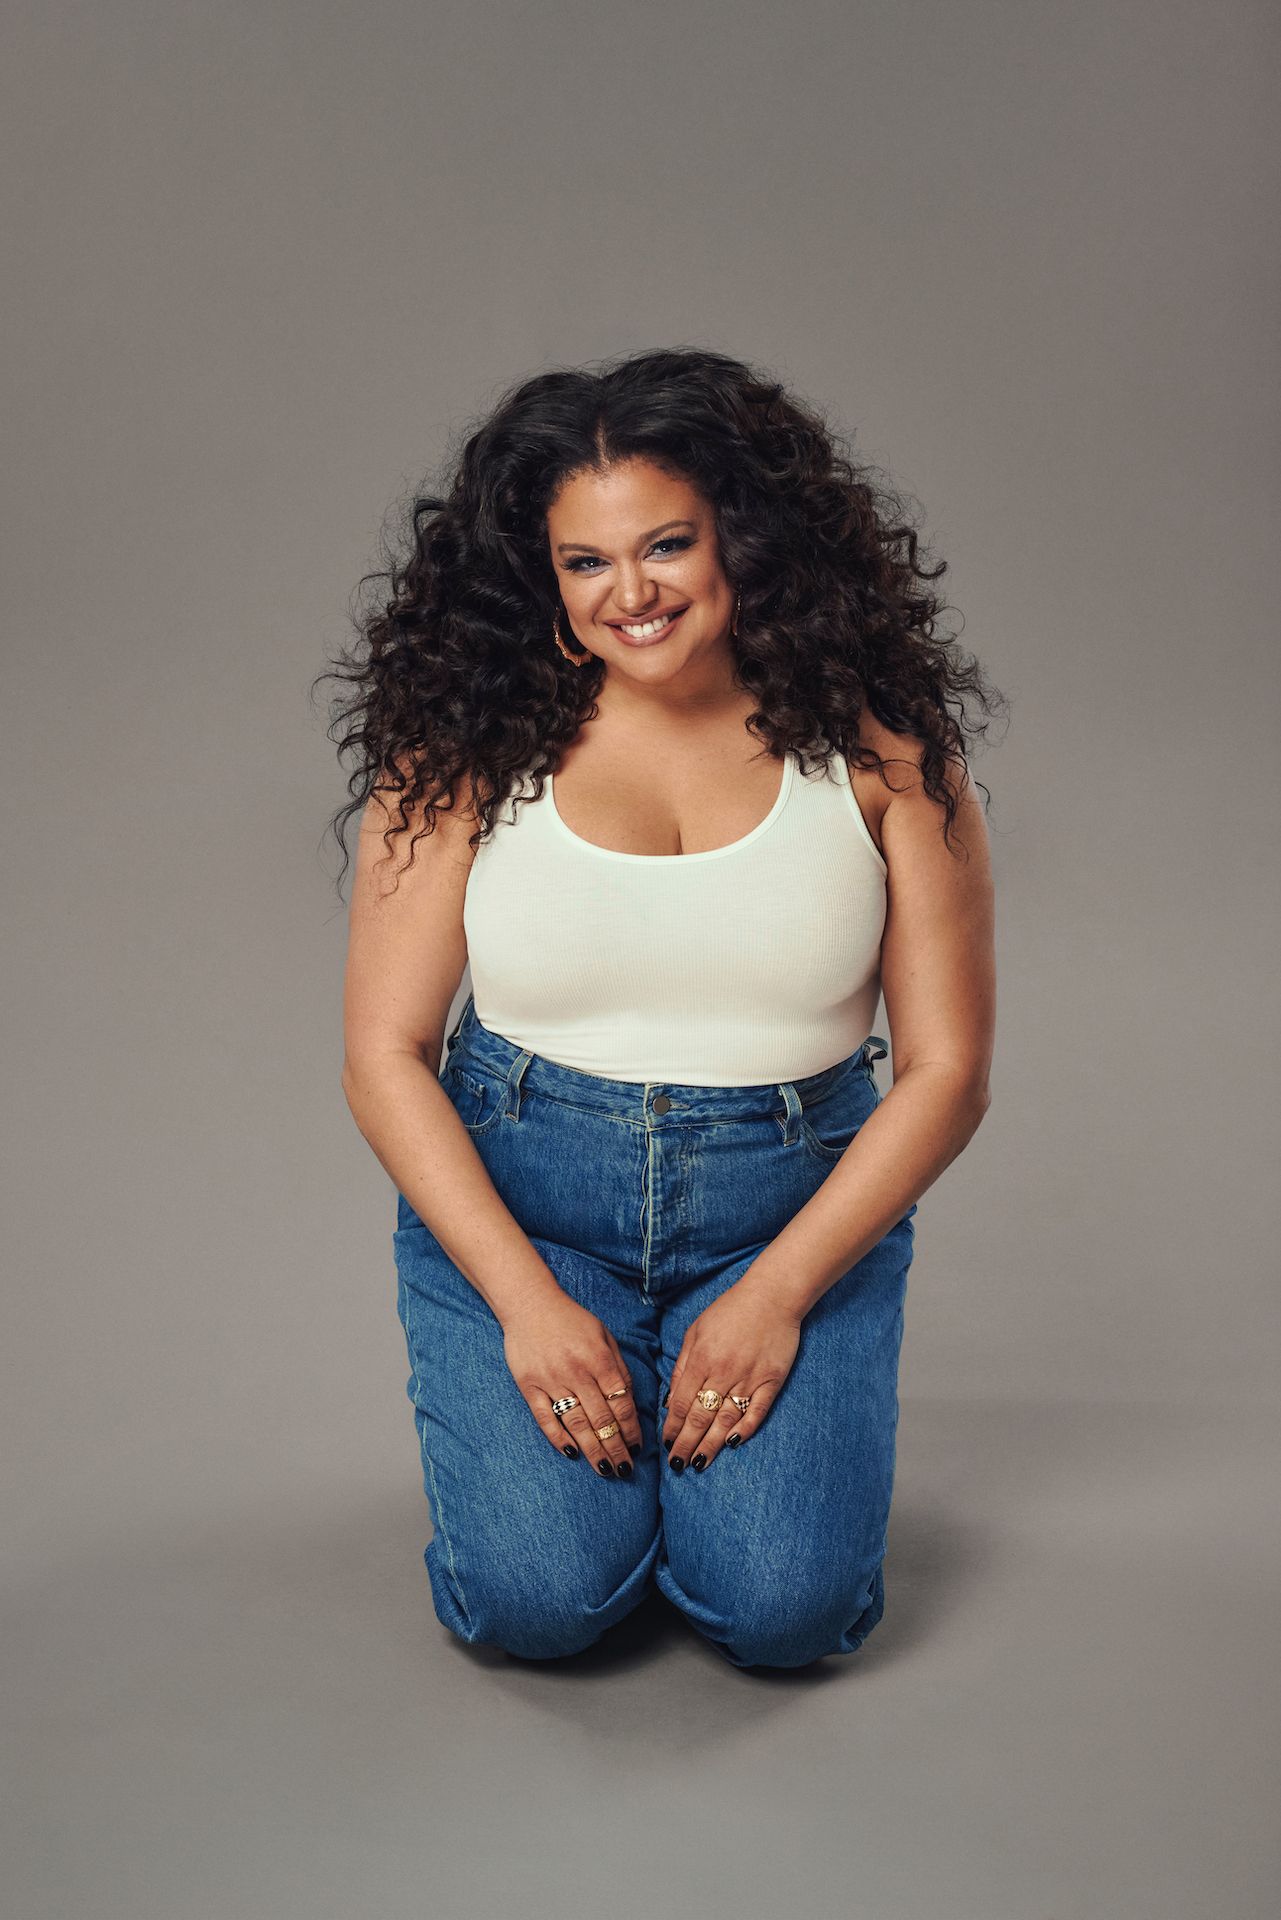 Michelle Buteau on Bringing Her Life Story to the Screen pic